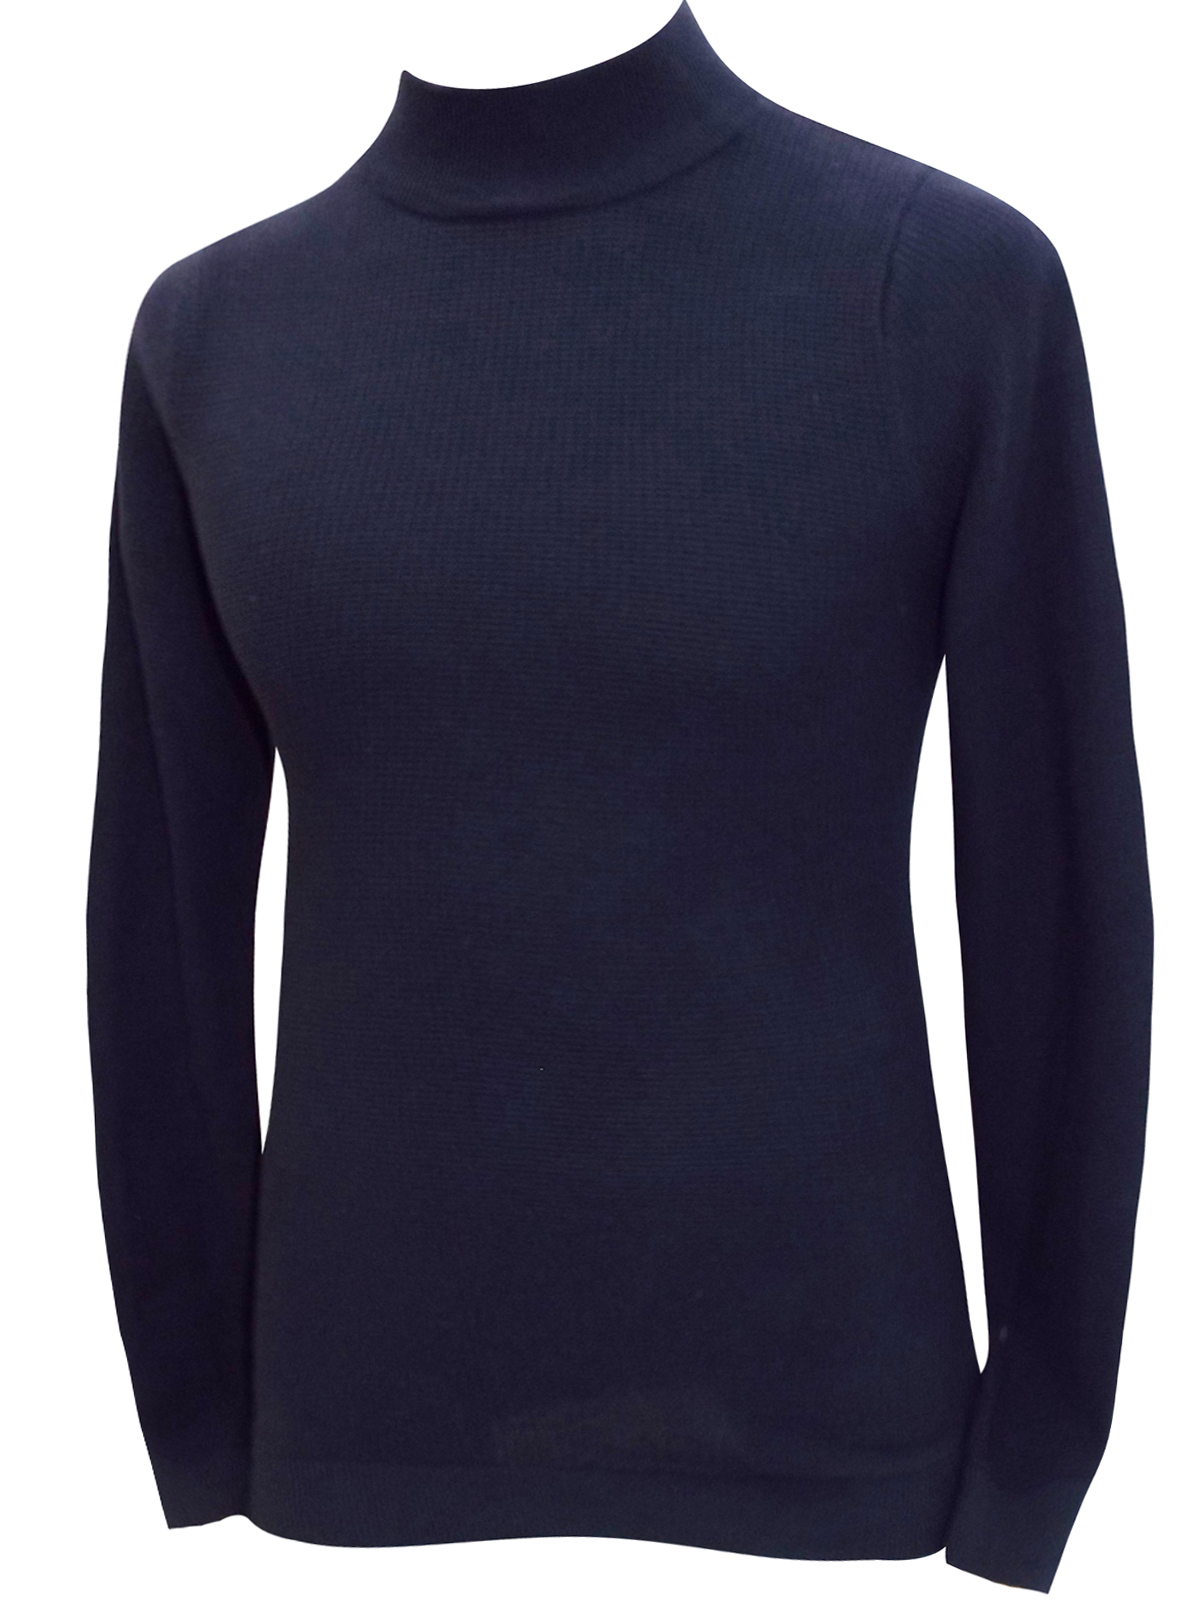 N3xt NAVY Pure Cotton High Neck Knitted Jumper - Size XSmall to XLarge